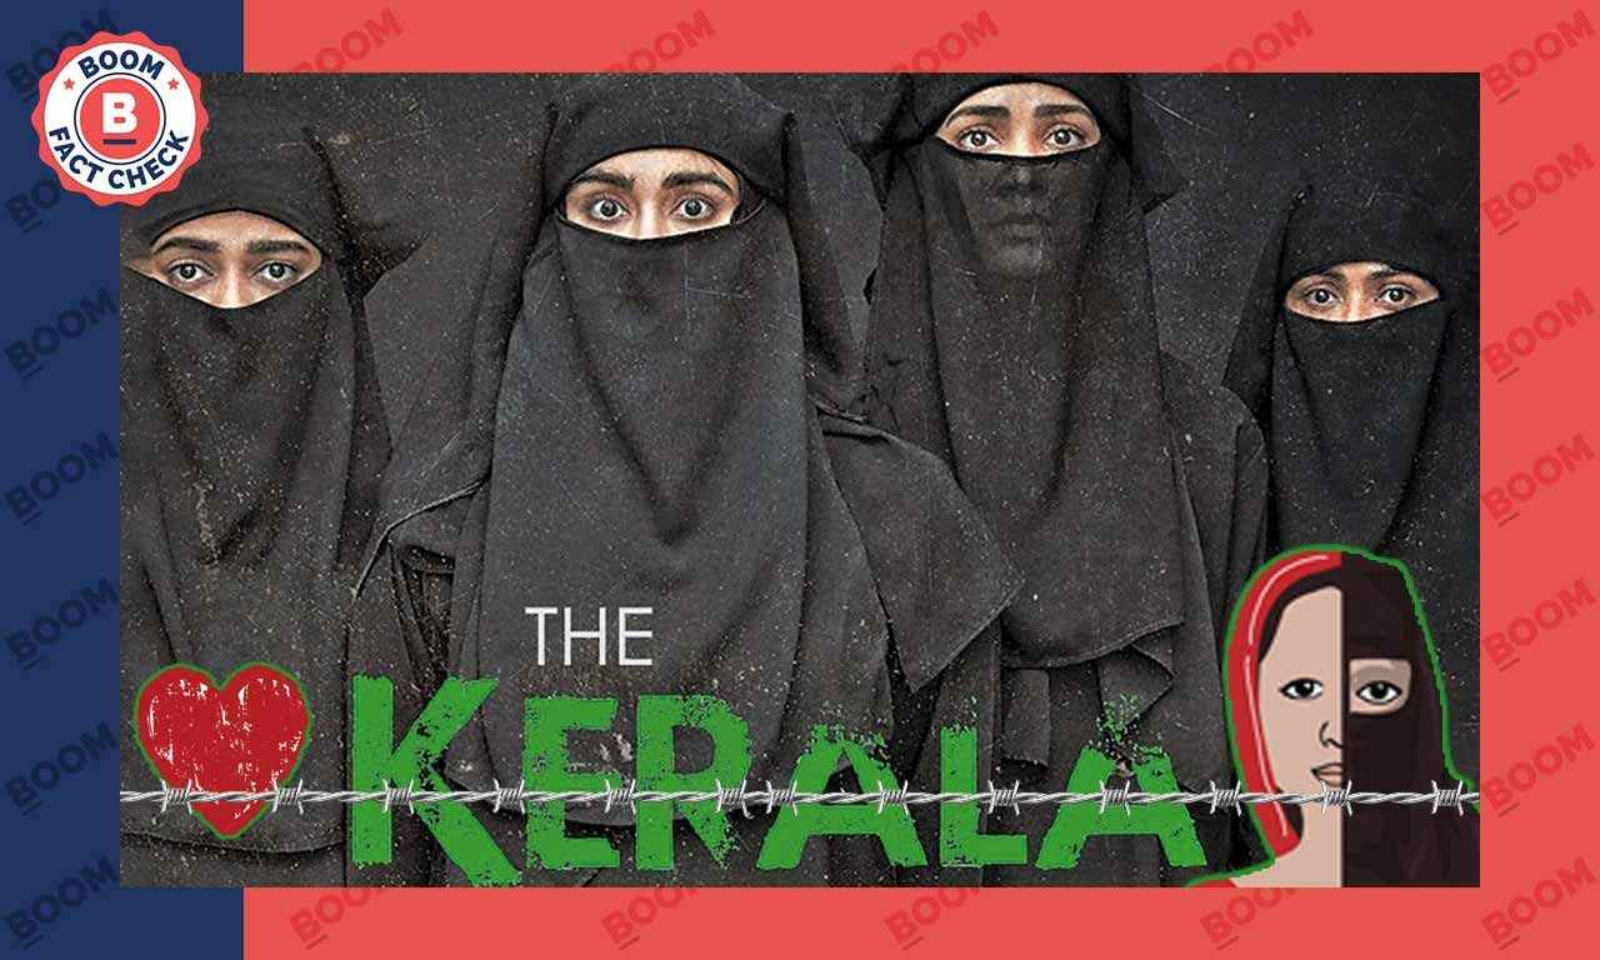 32K Women Missing Claim Made By 'The Kerala Story' Does Not Add Up | BOOM